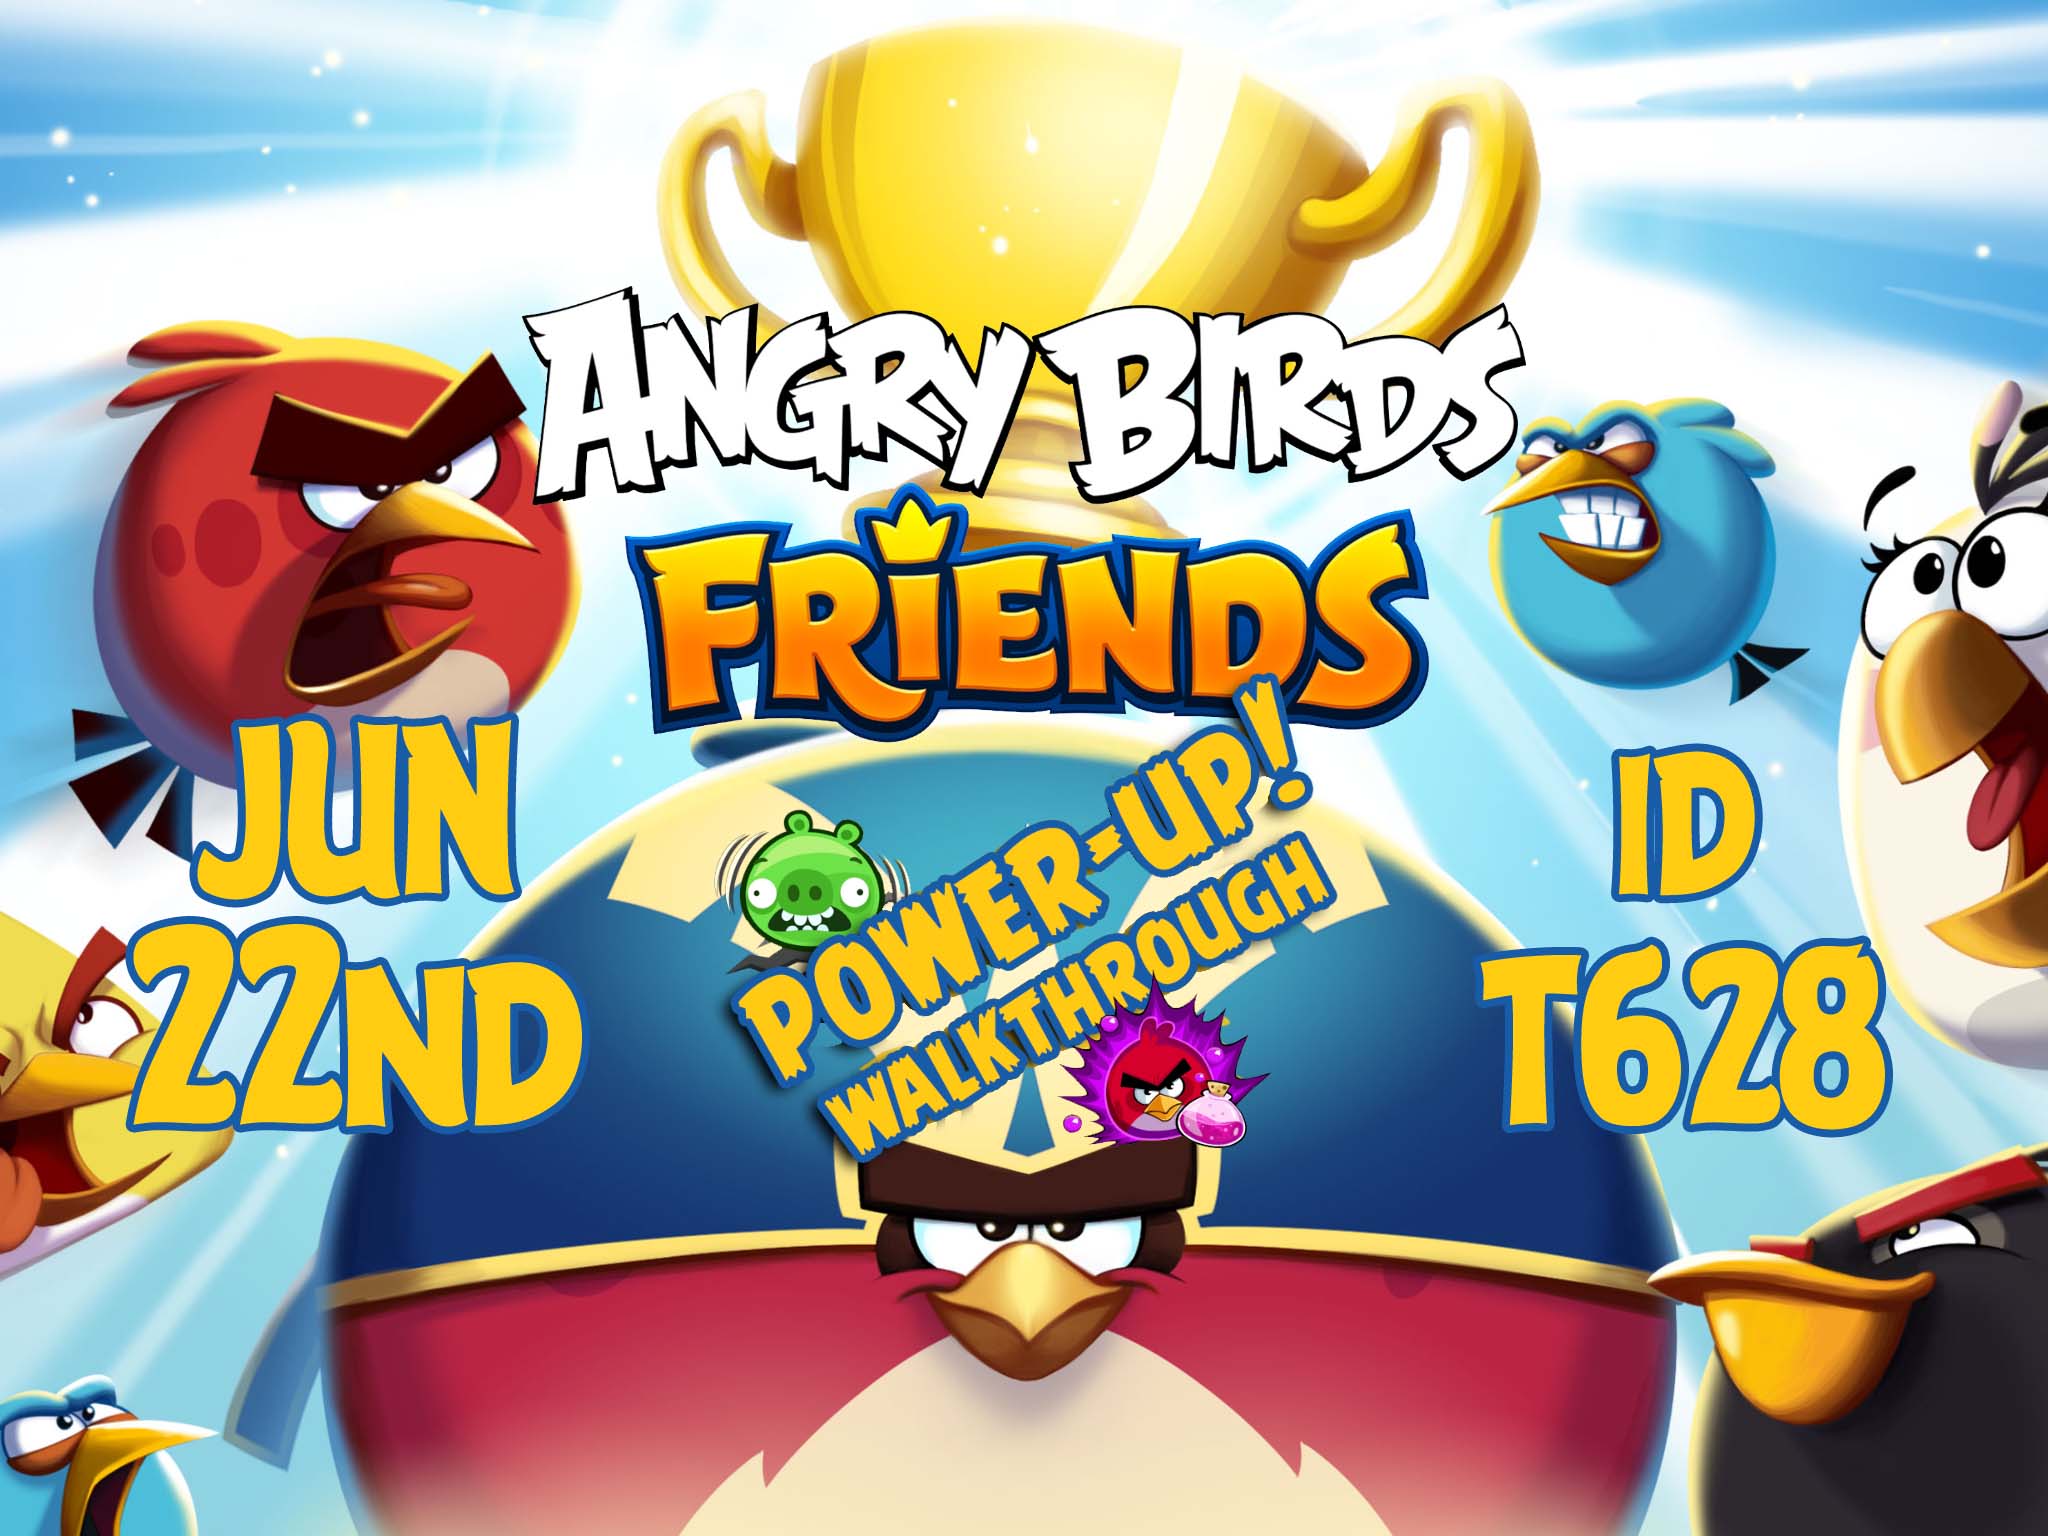 Angry-Birds-Friends-Tournament-T628-Feature-Image-PU